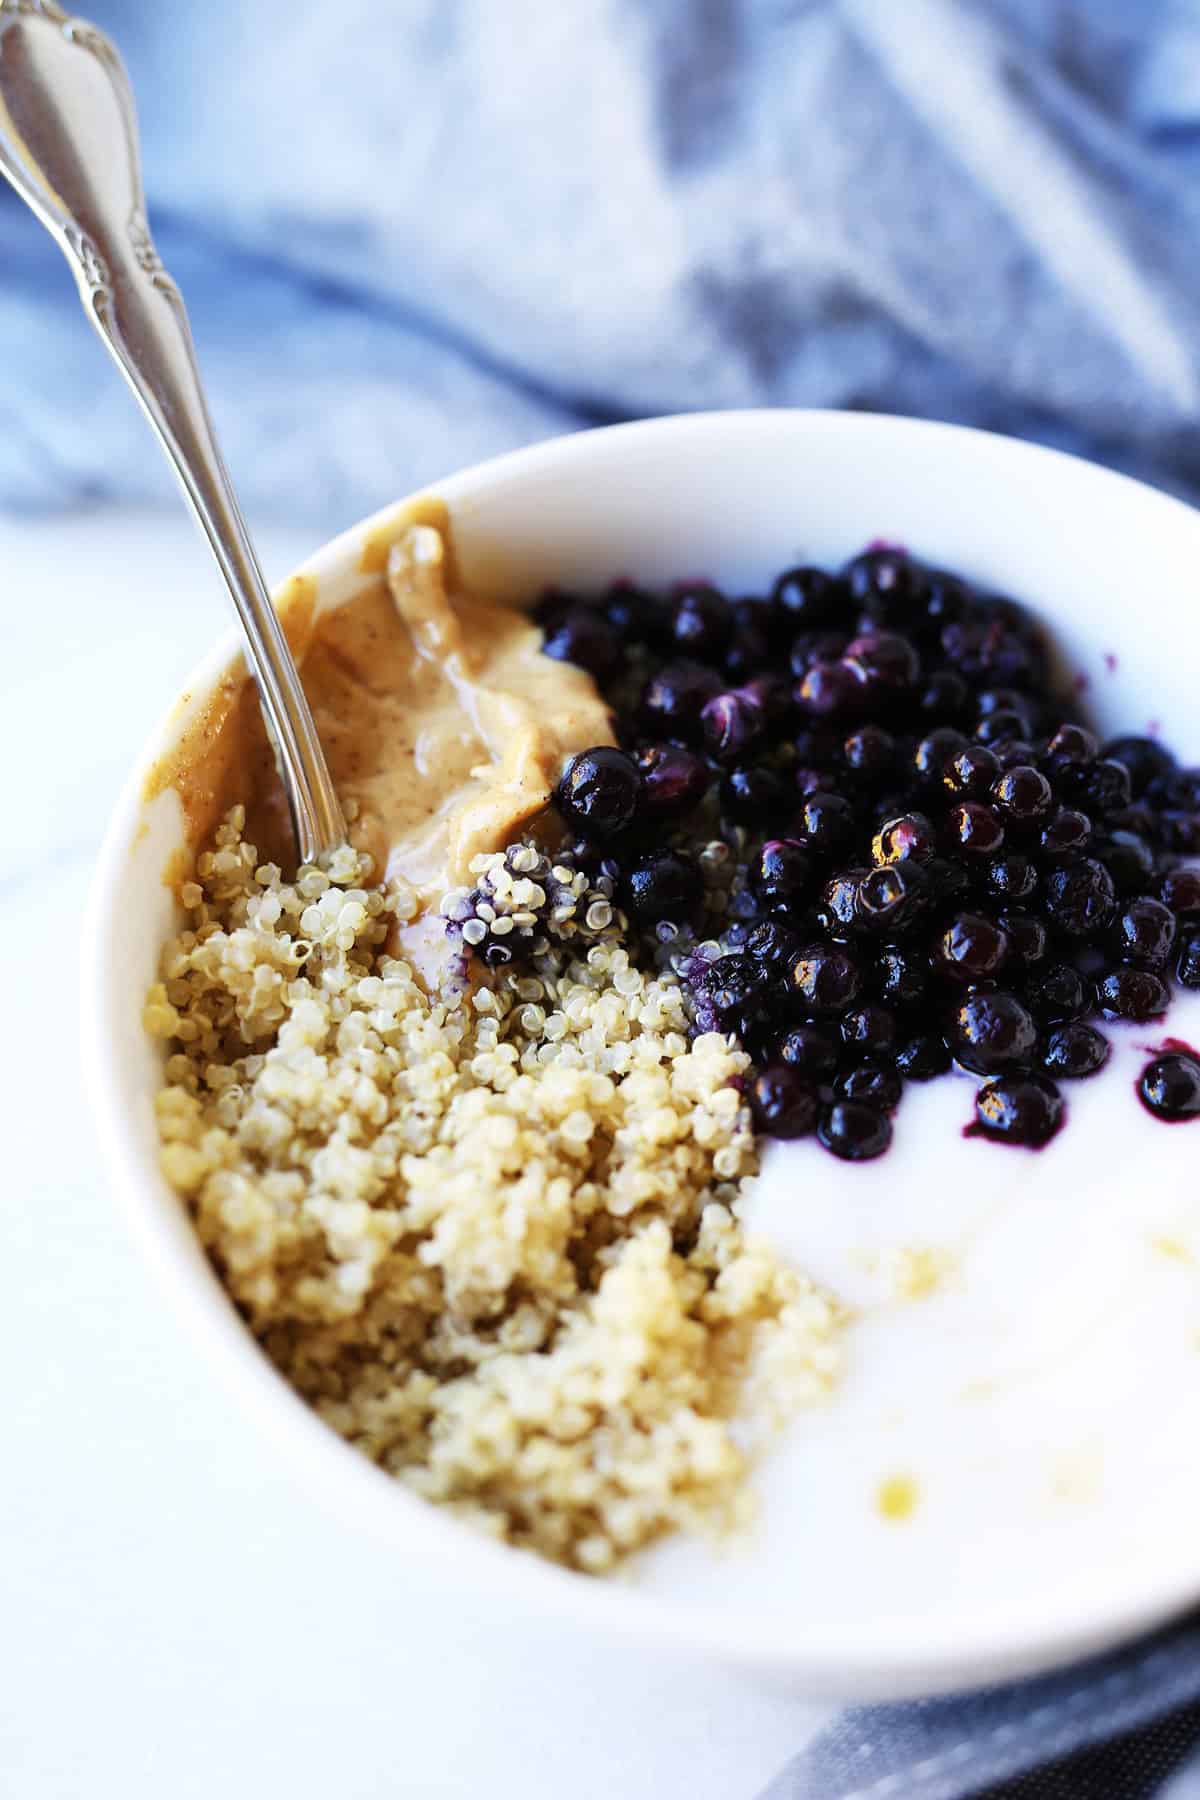 This 5 Ingredient Protein Quinoa Bowl is super easy, packed full of nutrition, vegan, gluten free, healthy! Clean eating and great for meal prep!